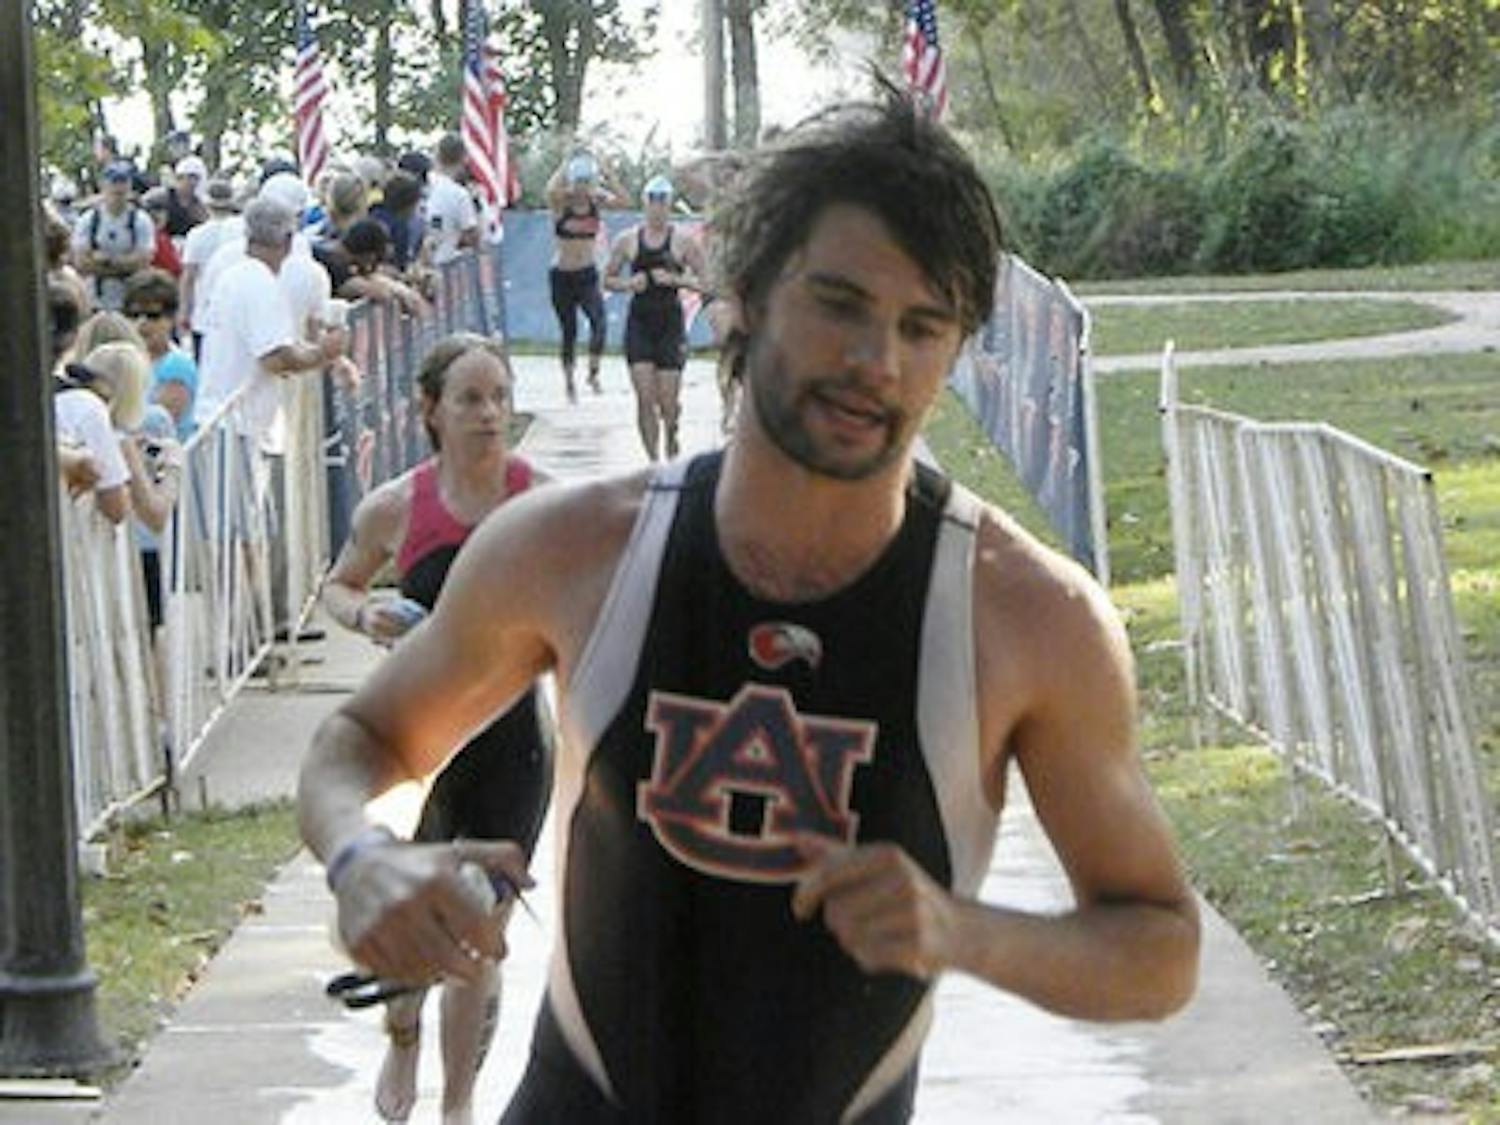 Robert Bedsole competes in the running portion of age group nationals. (Contributed)